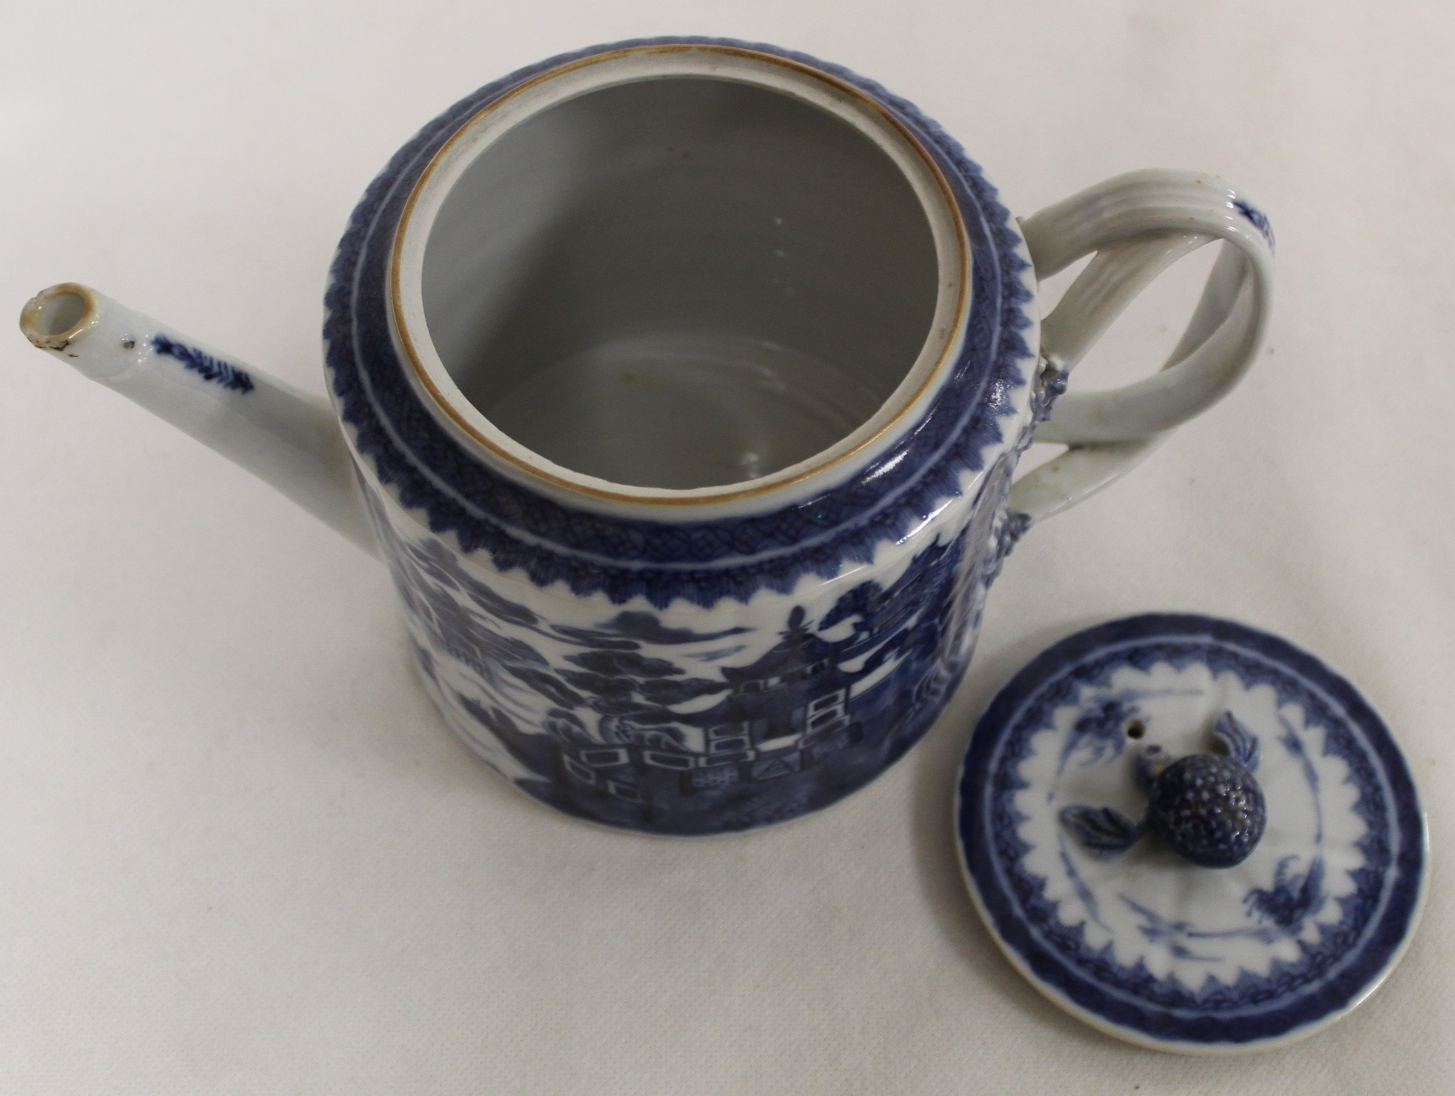 18th century Chinese blue and white porcelain teapot of reeded cylindrical form with entwined - Image 6 of 21